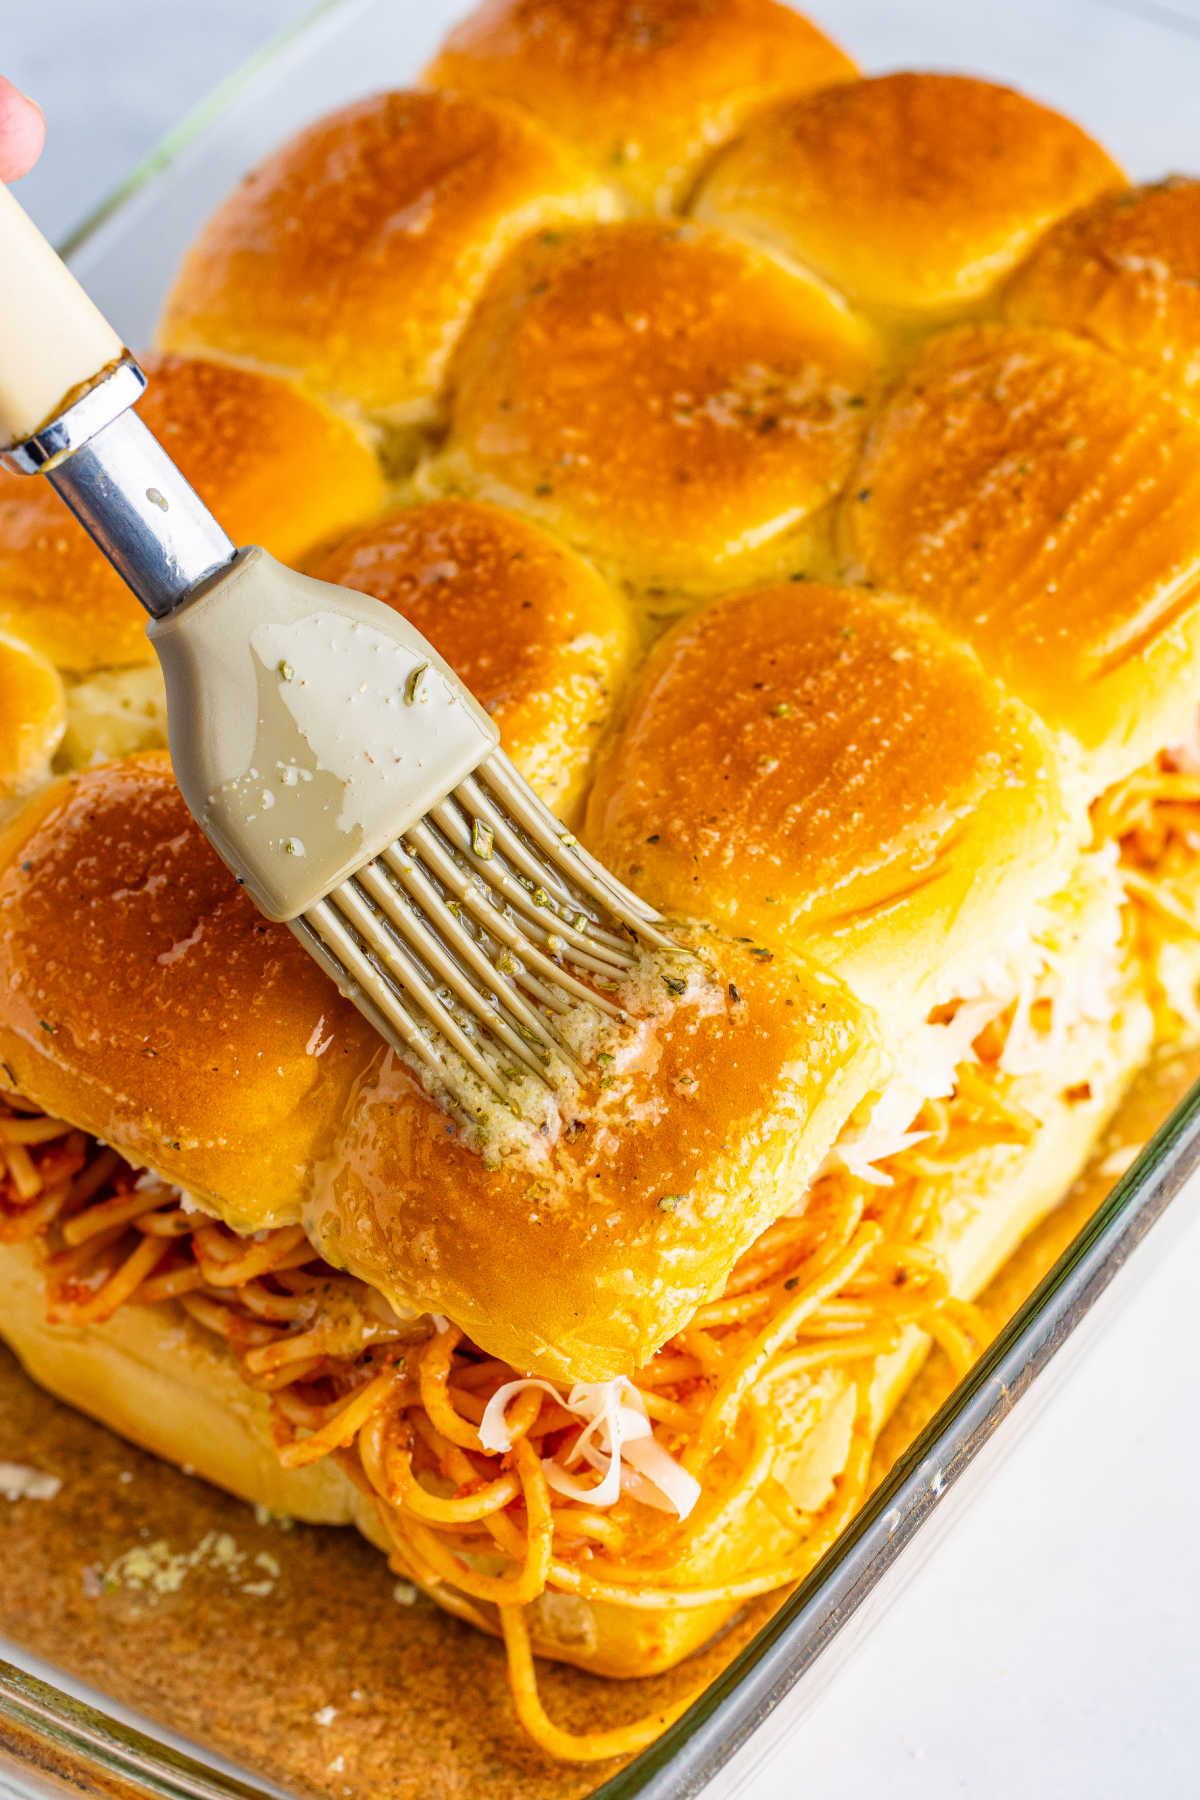 Brushing garlic butter over the top of the slider buns with spaghetti and cheese showing in the middle of the sliders.